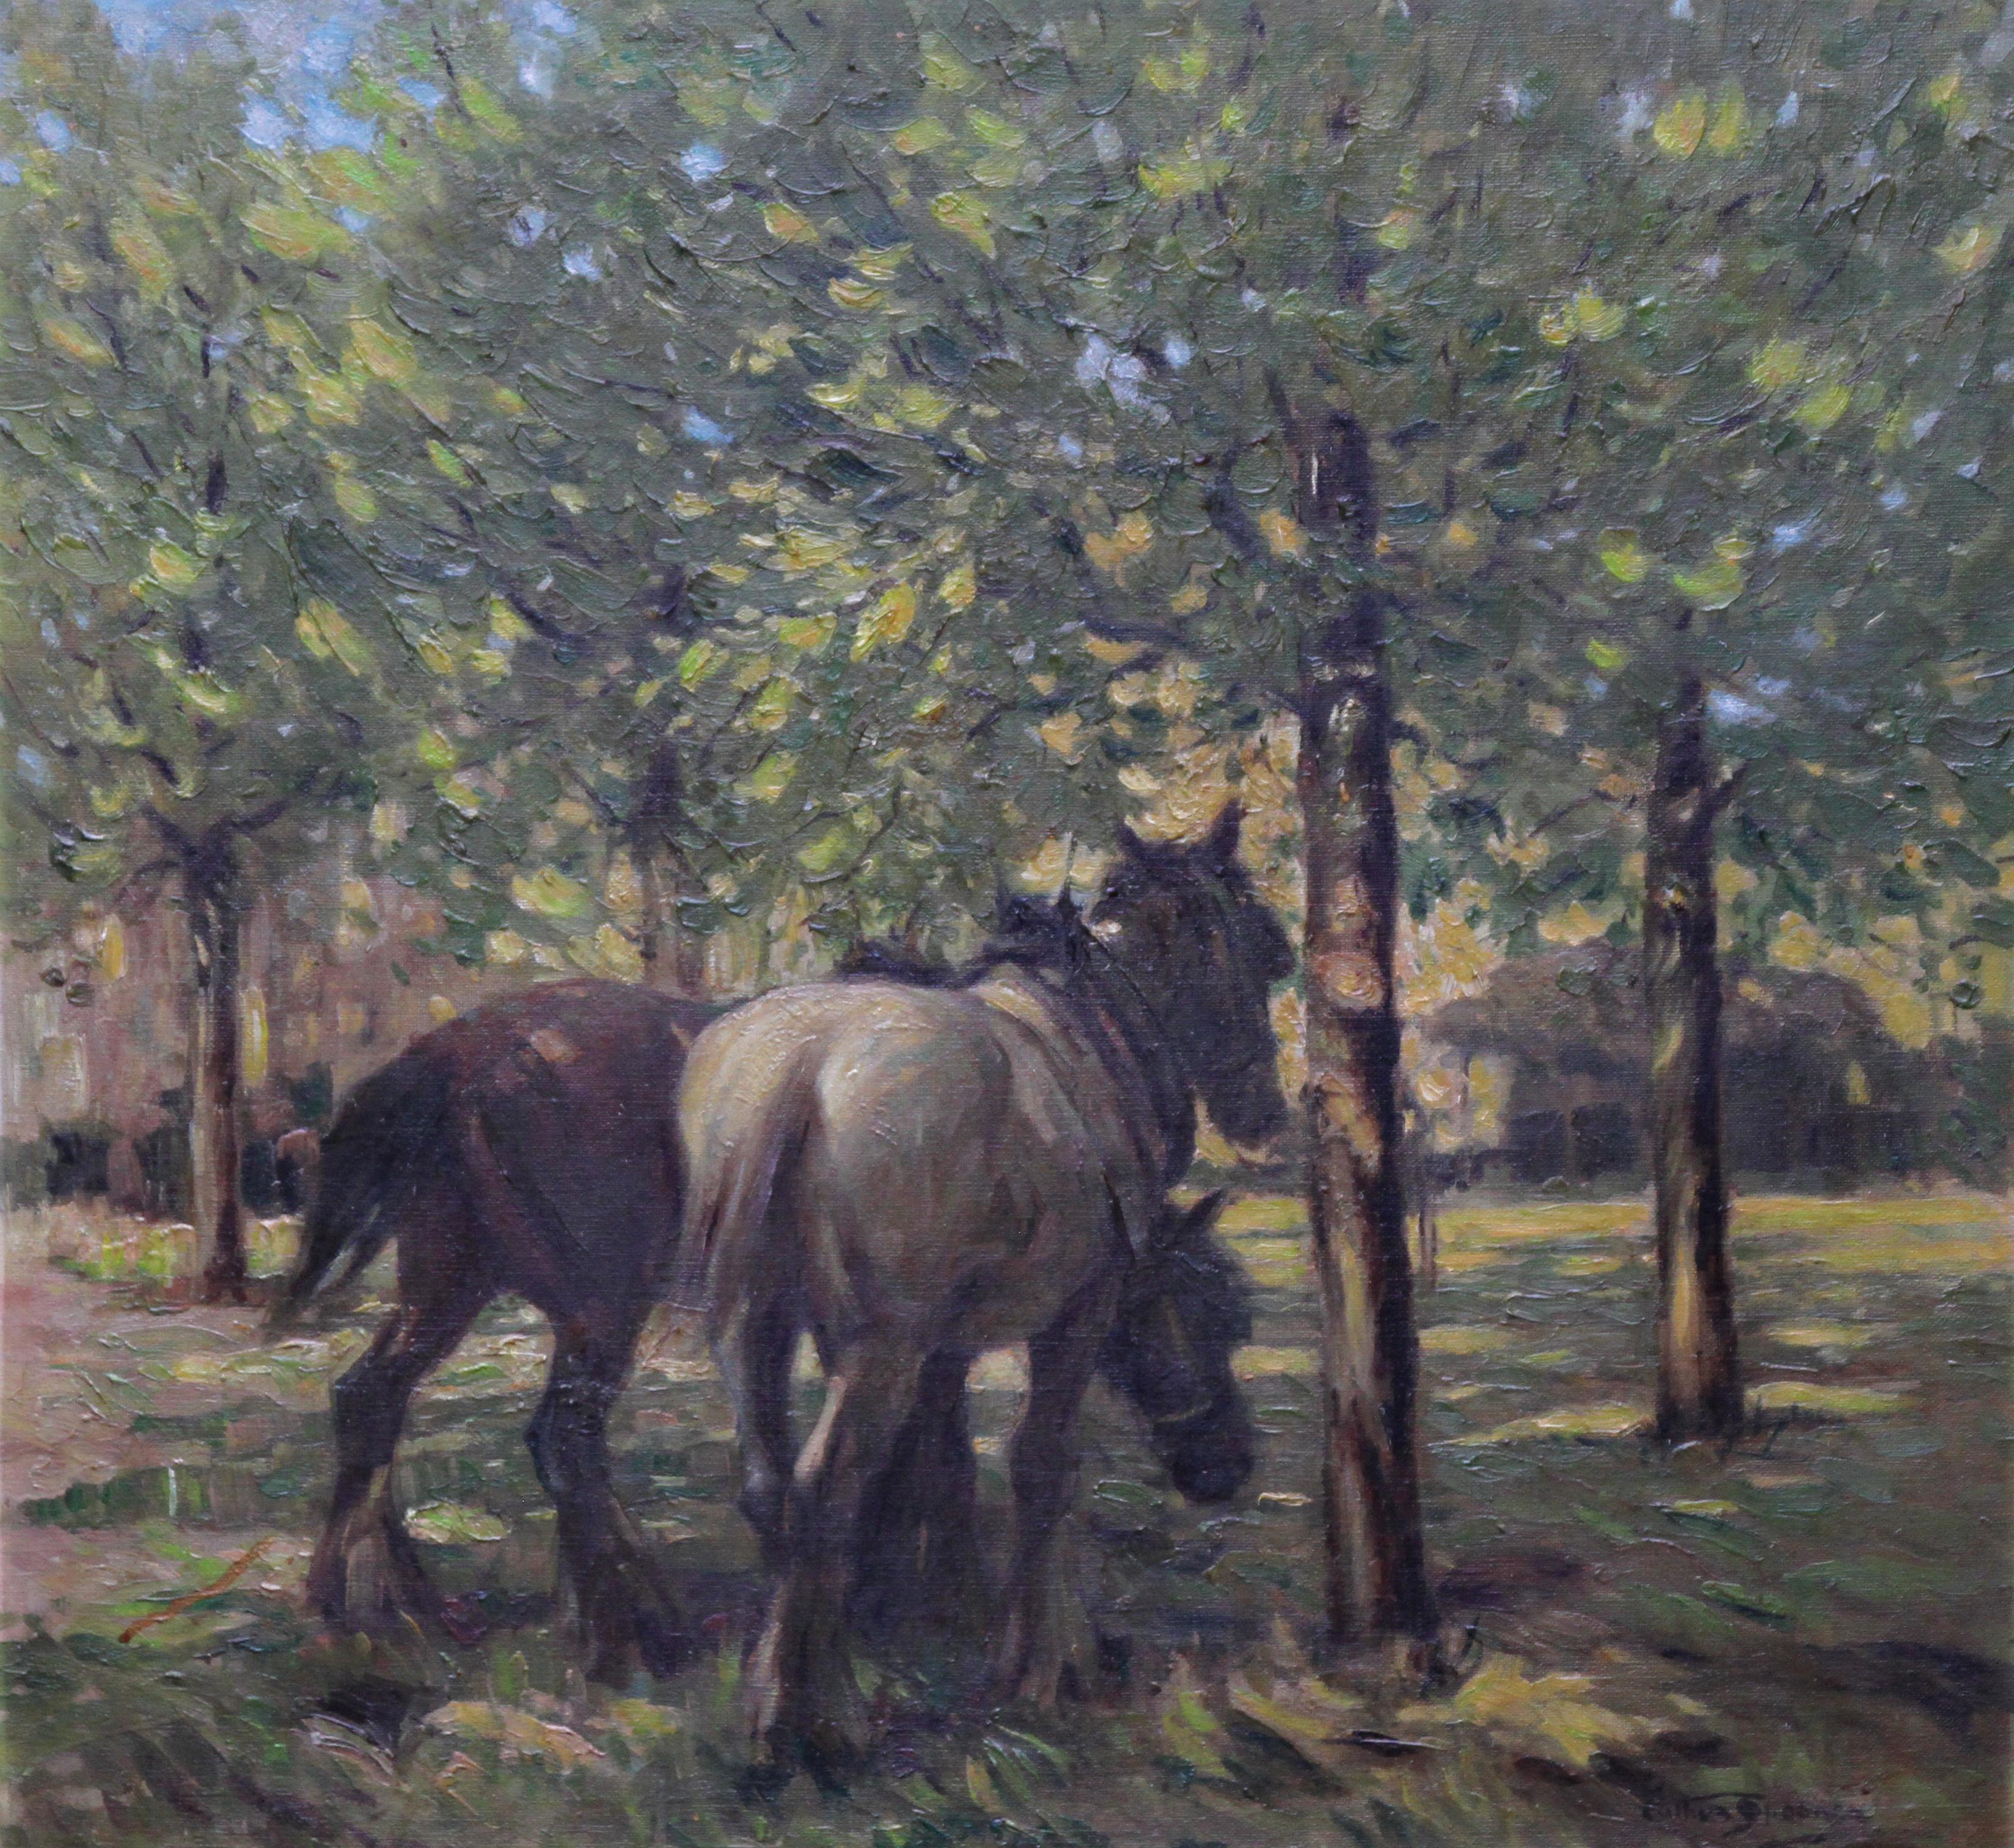 Portrait of Horses in Dappled Sunlight - British 30's Impressionist oil painting - Painting by Arthur Spooner